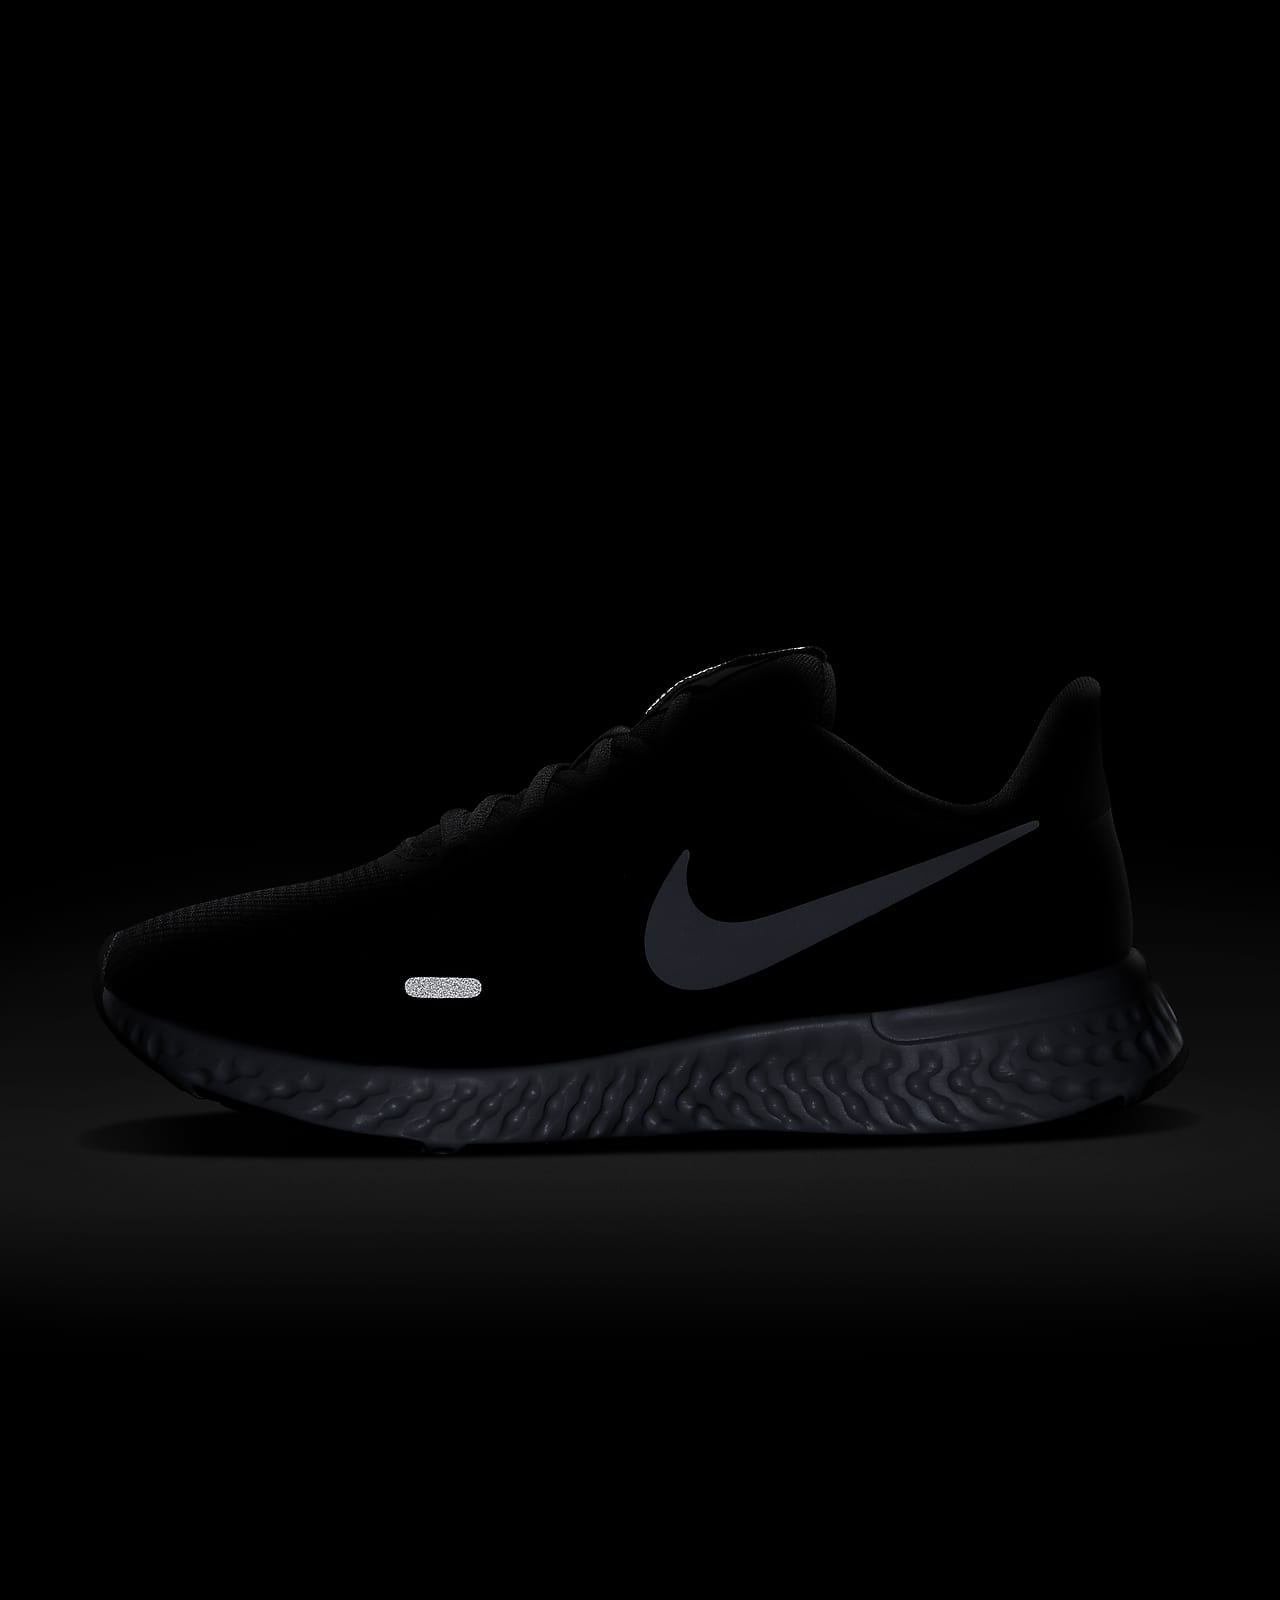 contact nike live chat